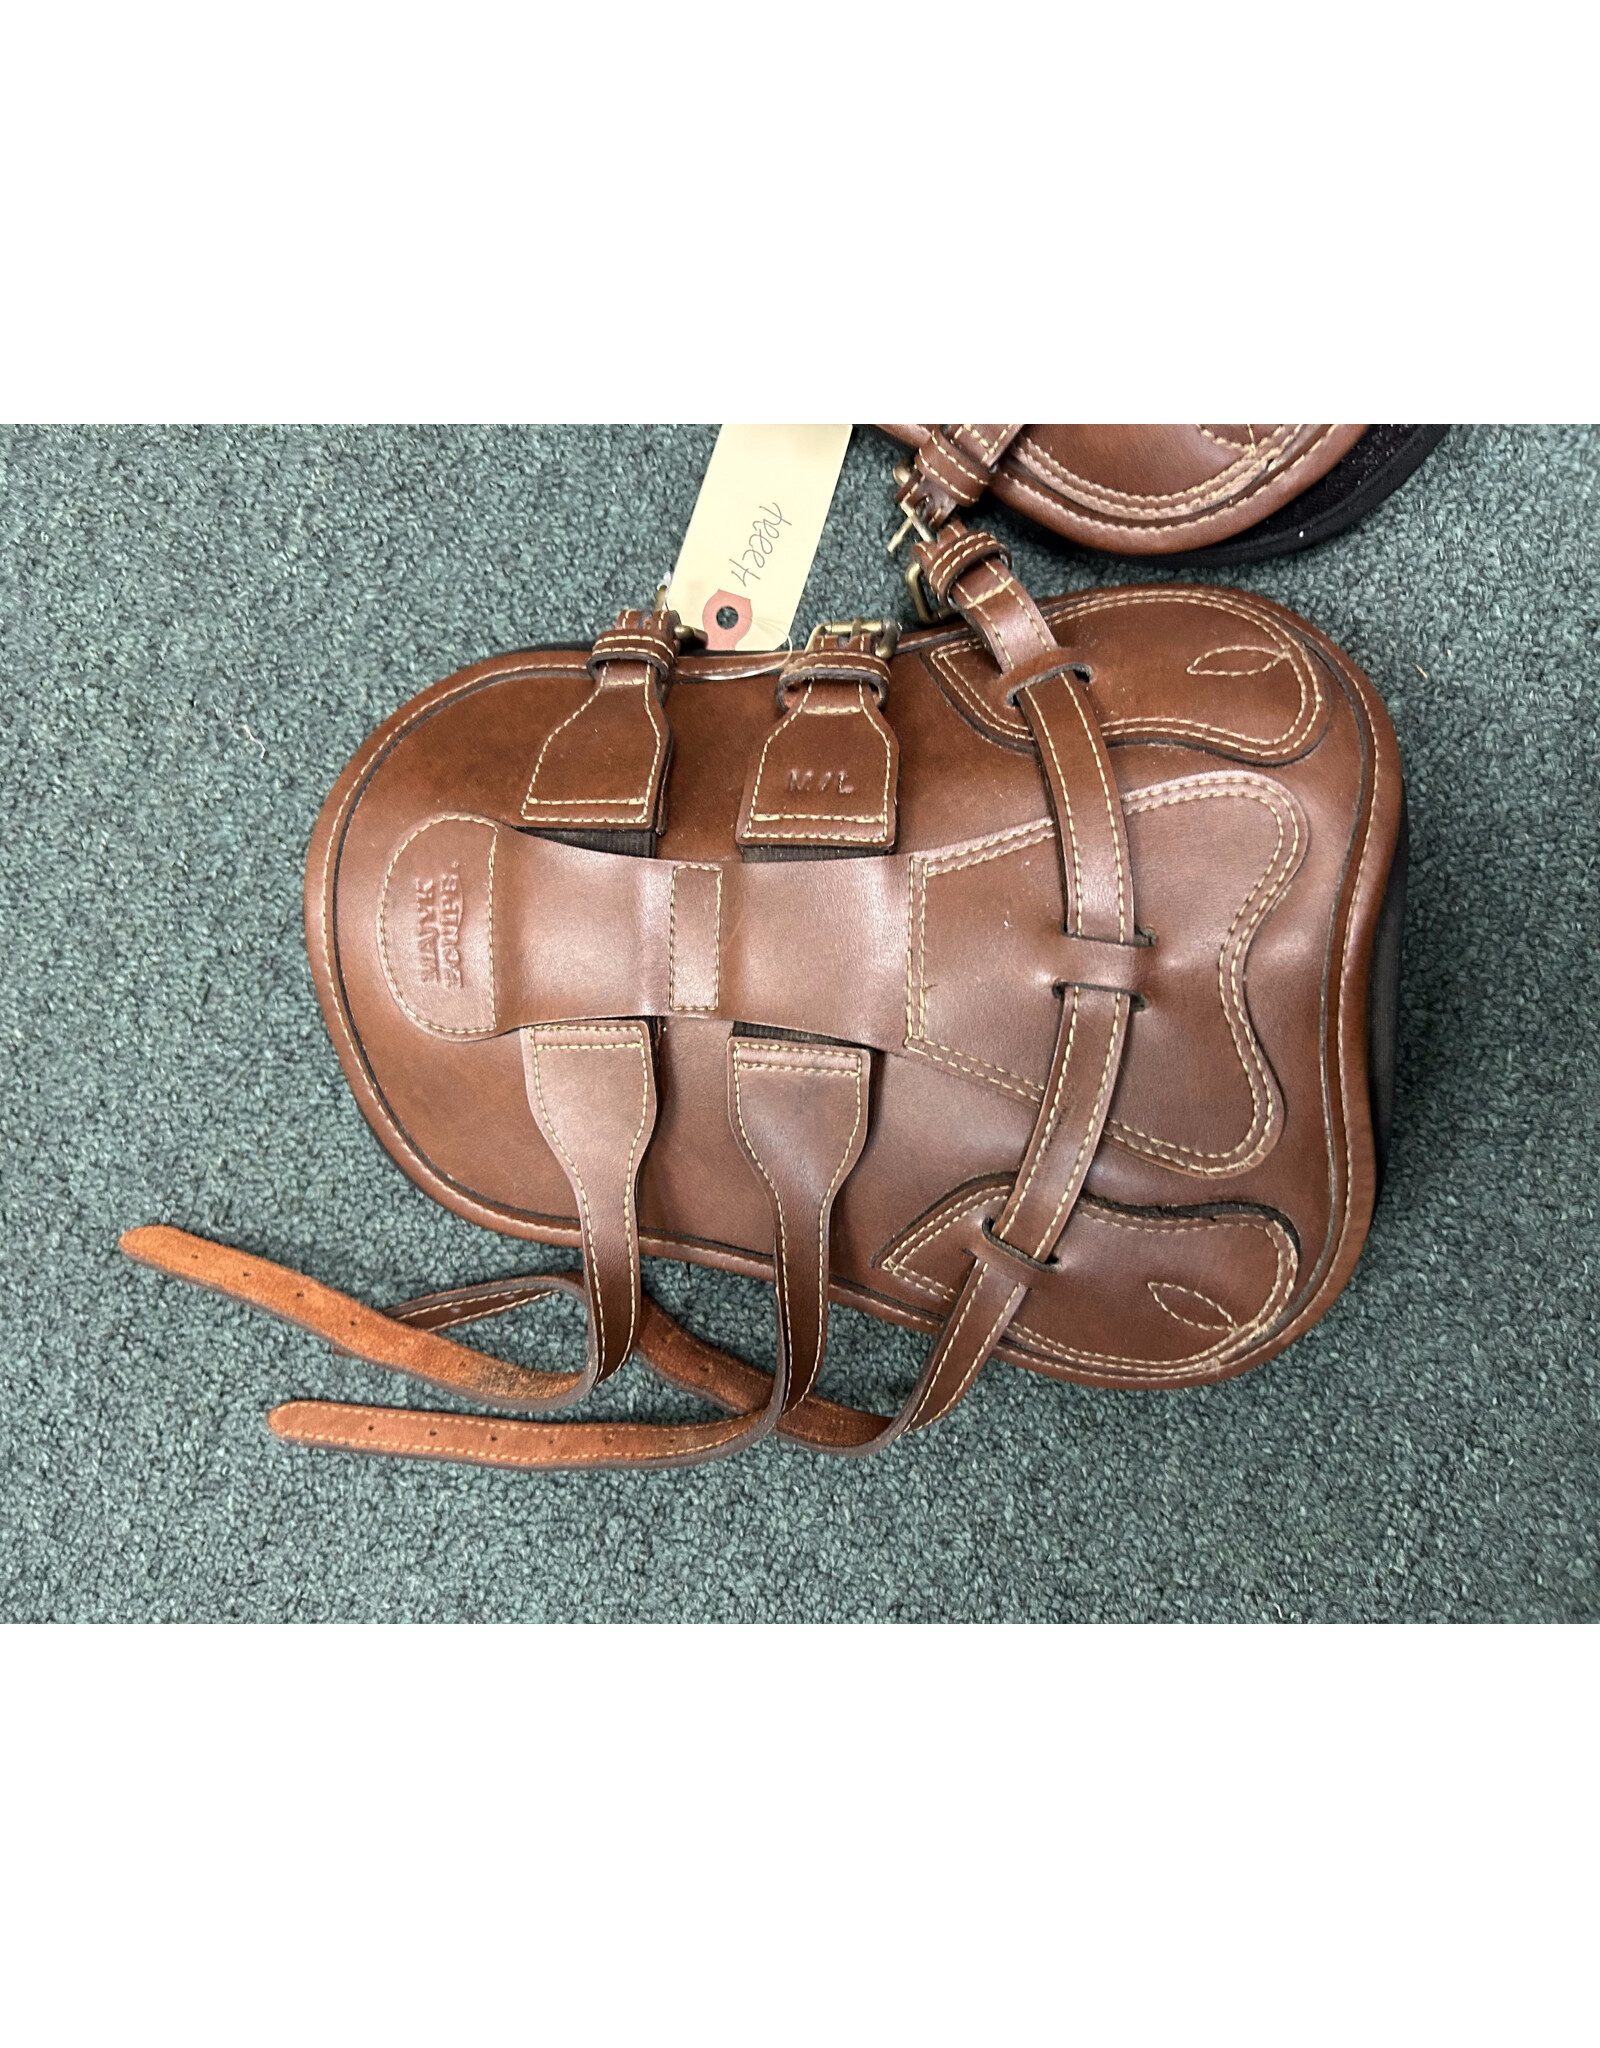 Majyk Equipe Equitation Boots Brown M/L